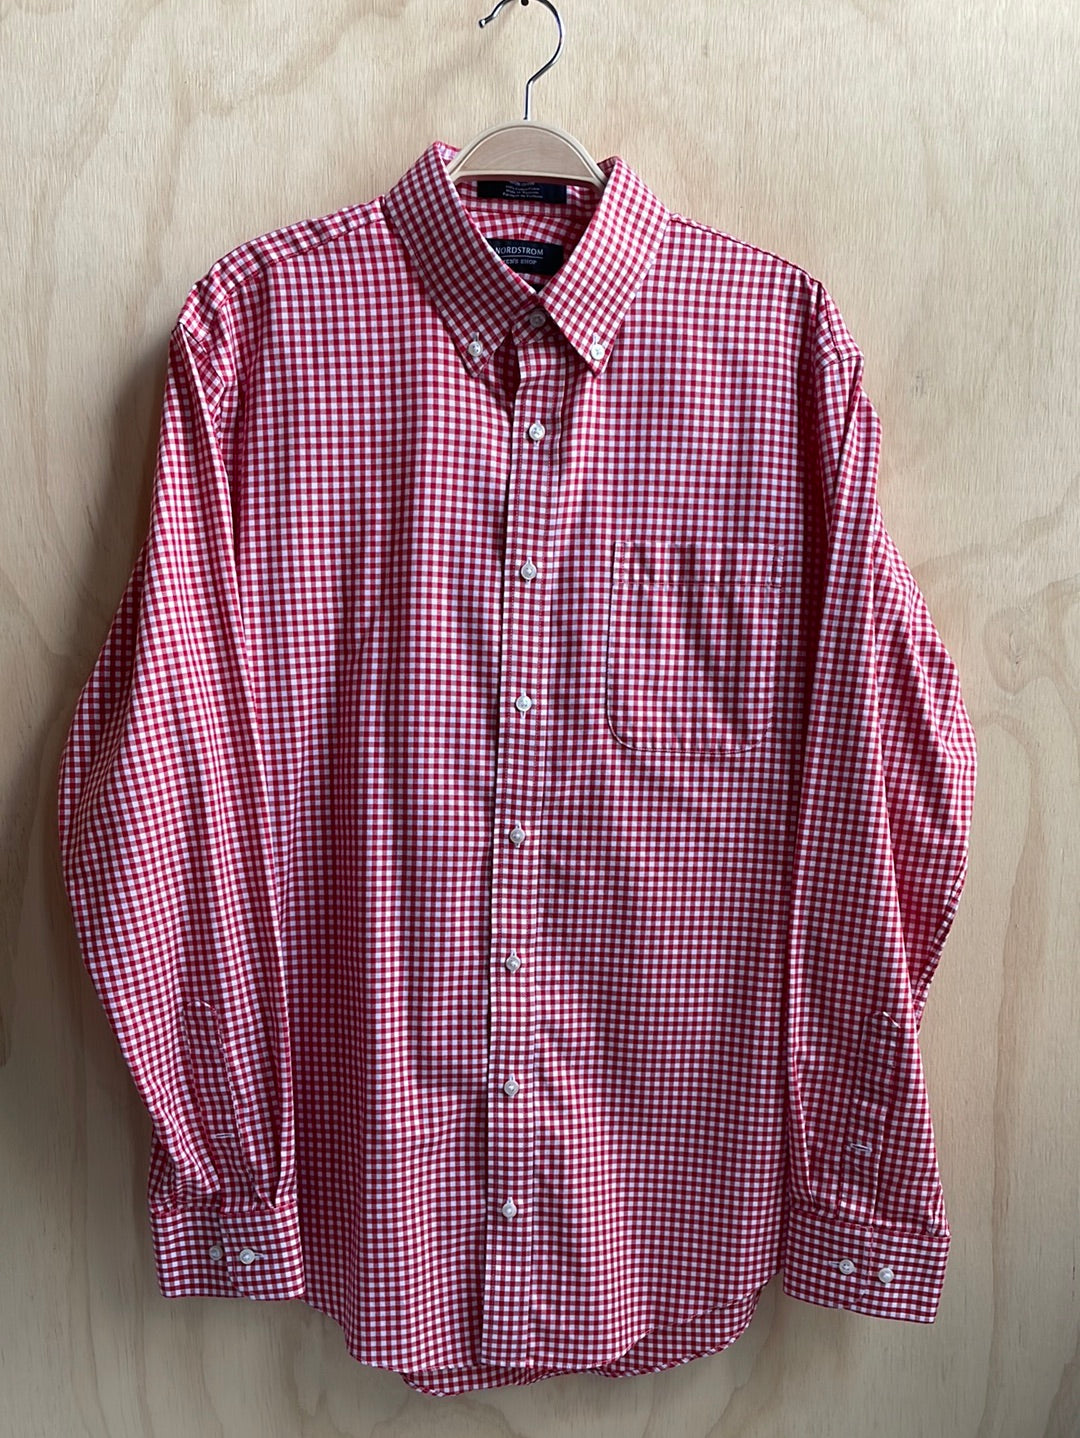 Red and White Checkered Button down shirt